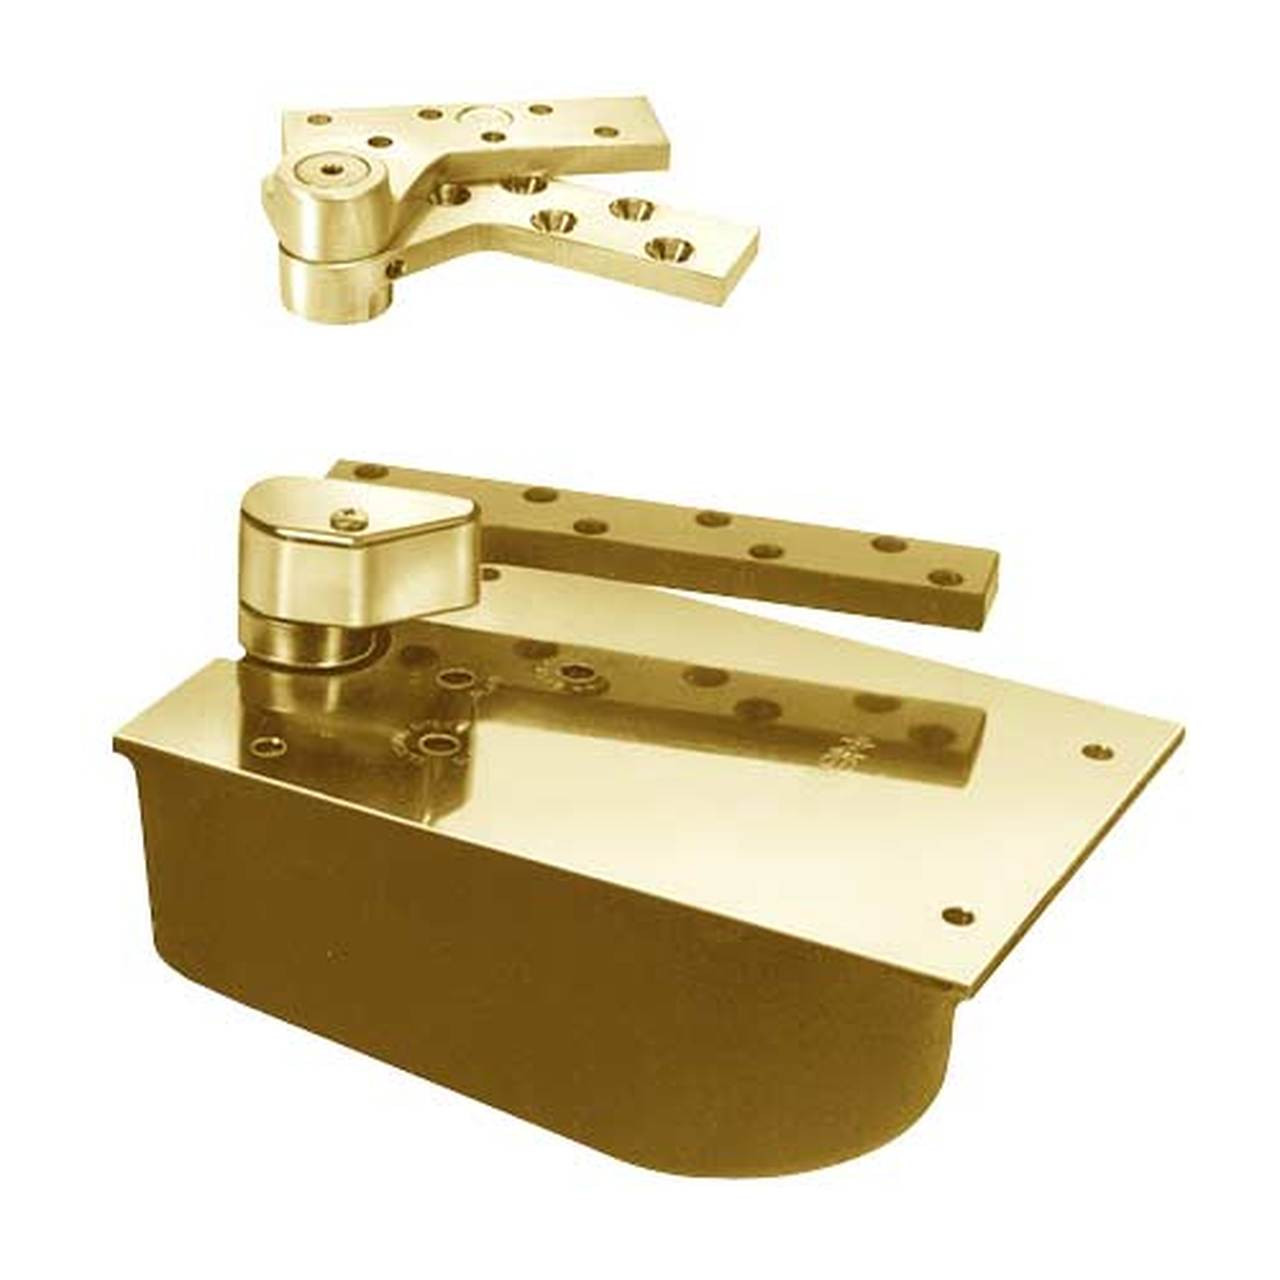 L27-90N-LFP-LCC-LH-605 Rixson 27 Series Extra Heavy Duty Lead Lined Offset Floor Closer in Bright Brass